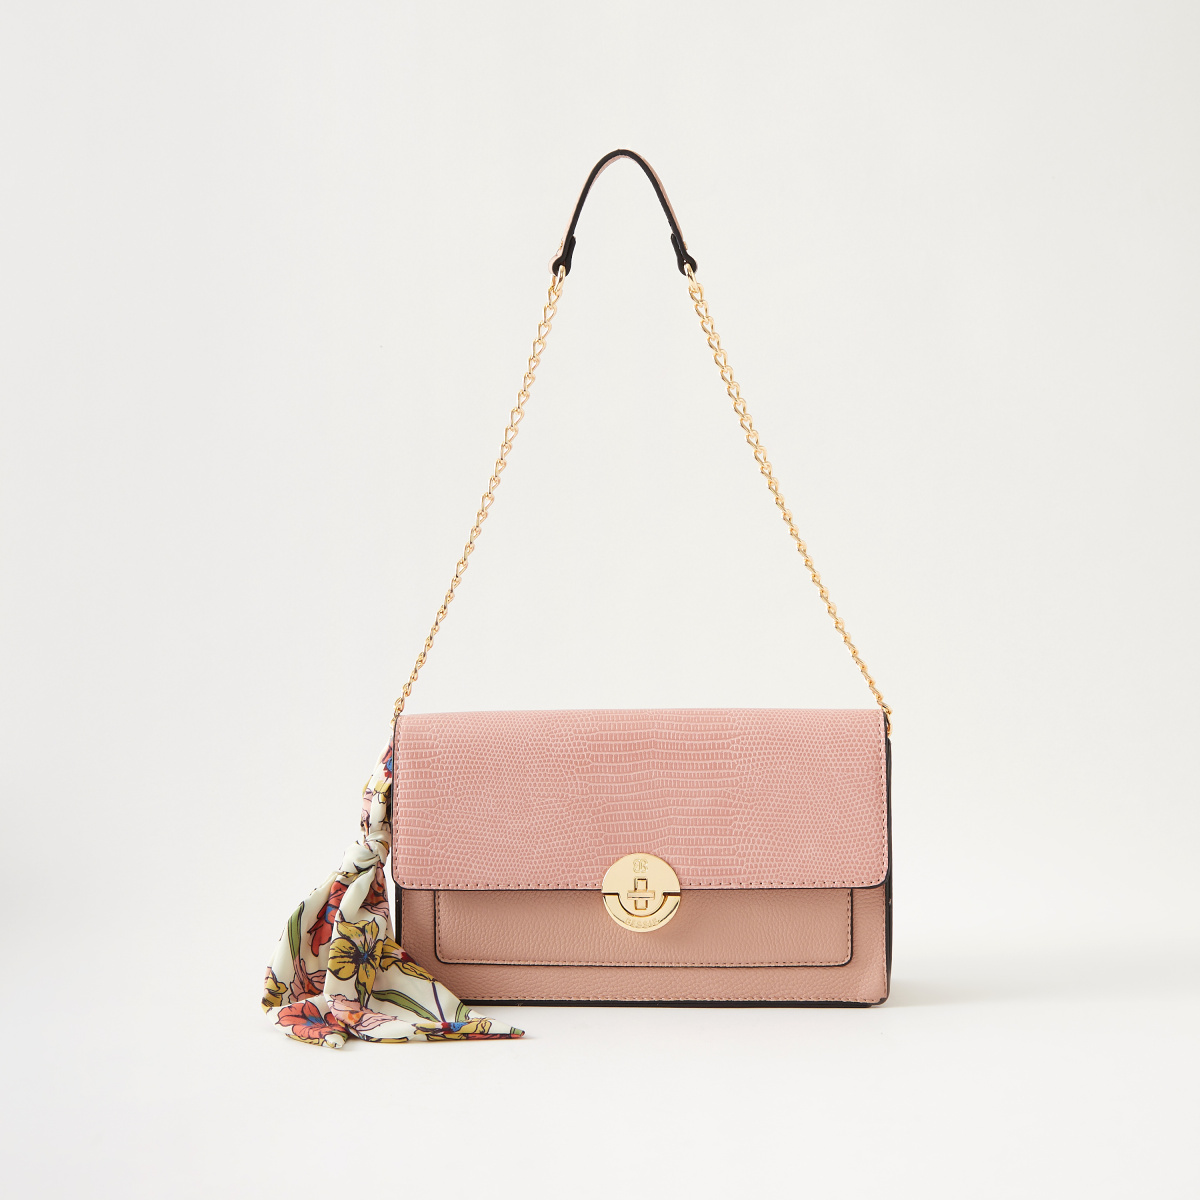 Bessie London Textured Crossbody Bag with Chain Strap and Button Closure